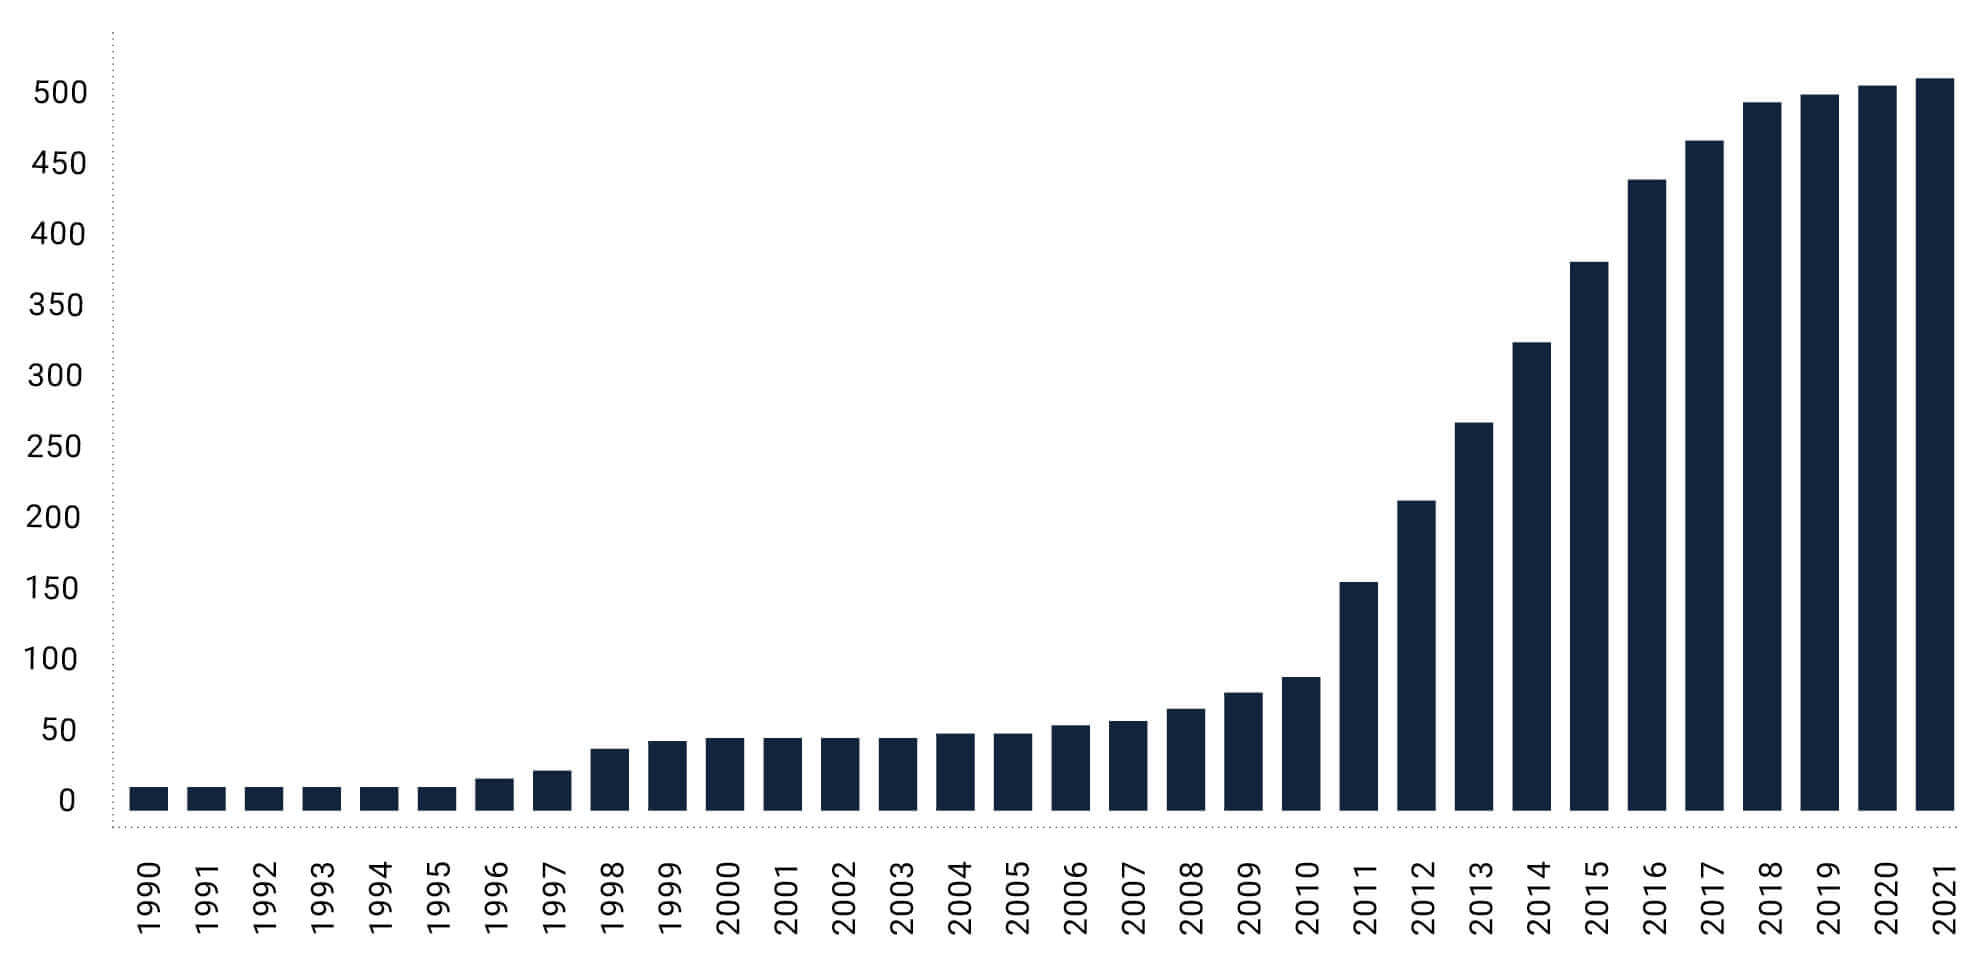 Number of Alternative Data Providers, from 1990 to 2021